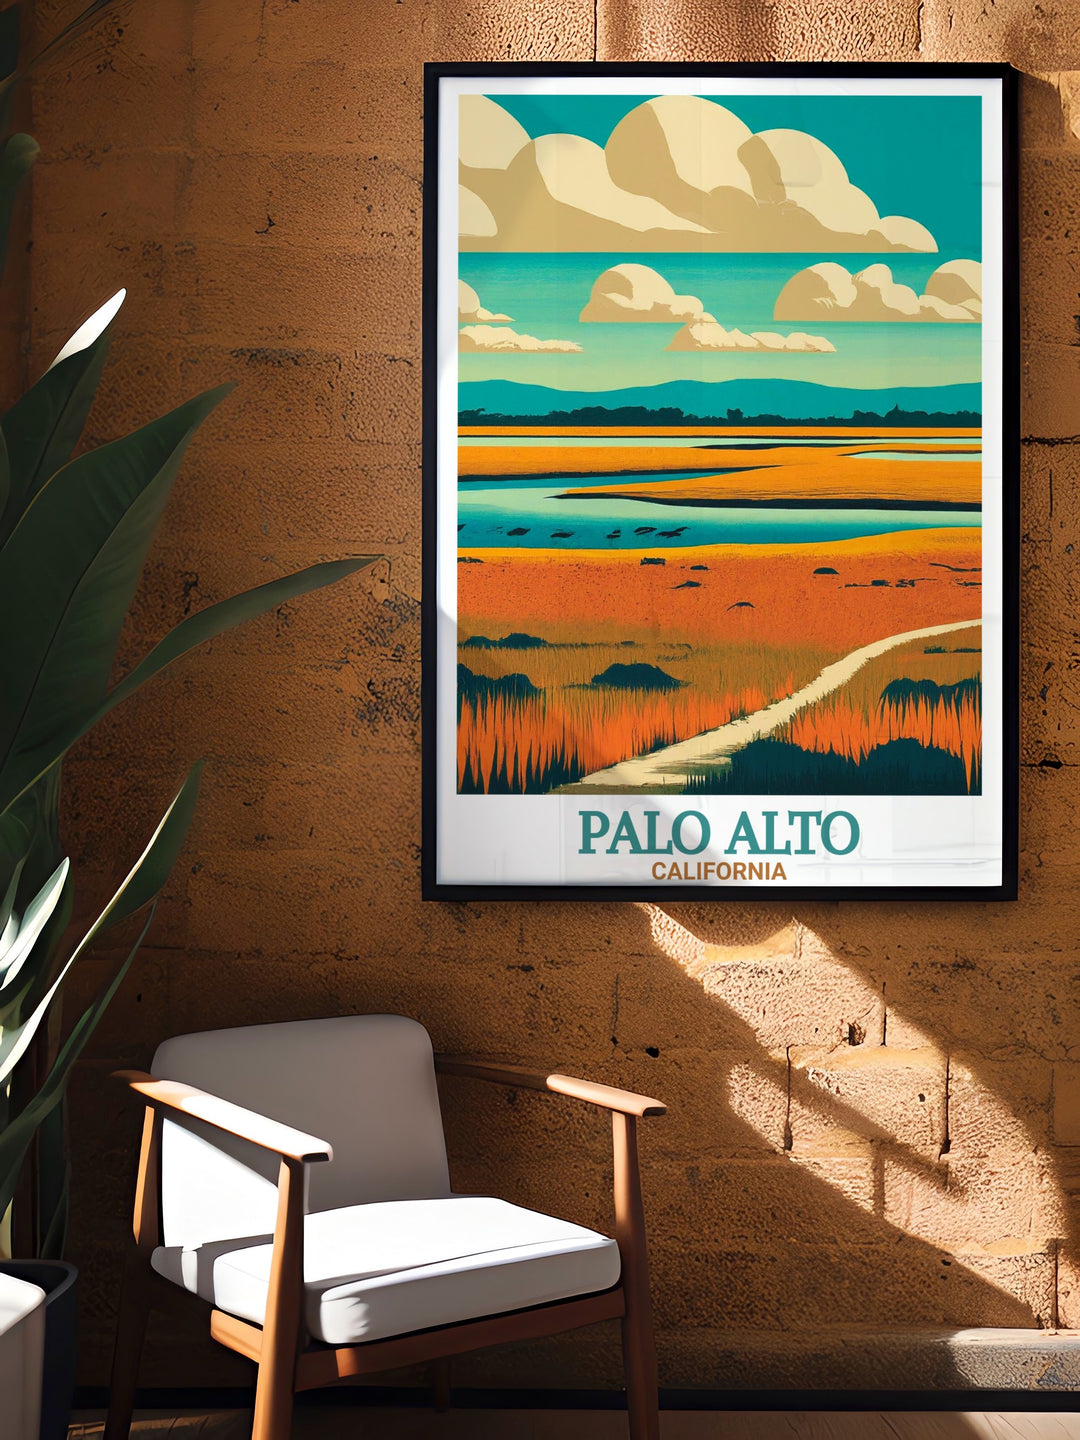 Travel poster of Palo Alto Baylands Nature Preserve showcasing the rich natural heritage of Palo Alto California with a detailed and vibrant design a perfect personalized gift for nature lovers and those who appreciate stunning artwork.